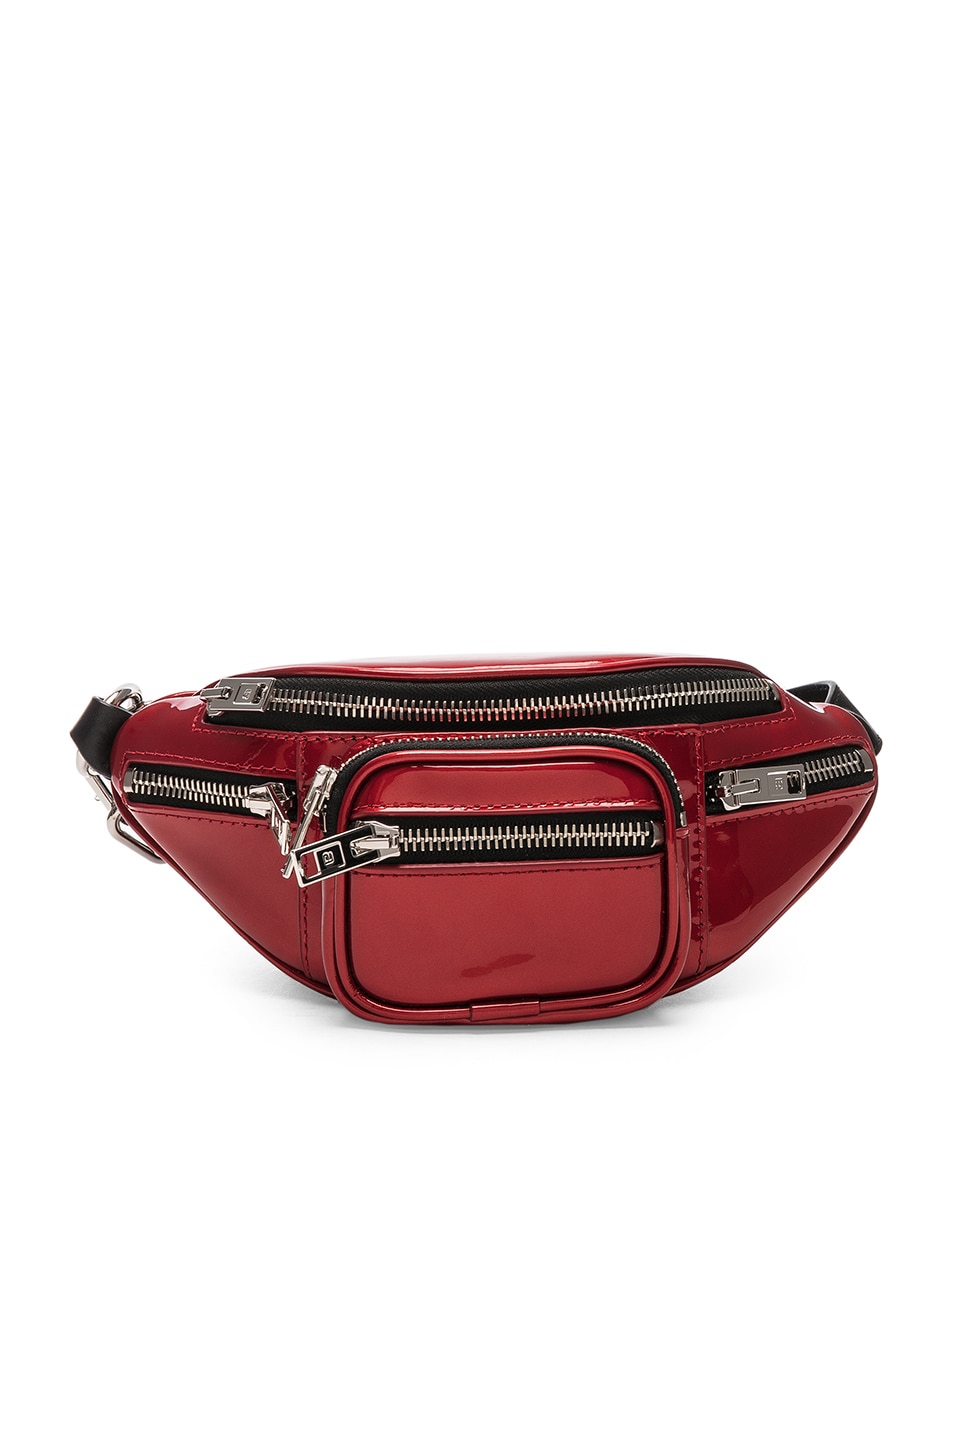 Image 1 of Alexander Wang Attica Patent Mini Fanny Pack in Red